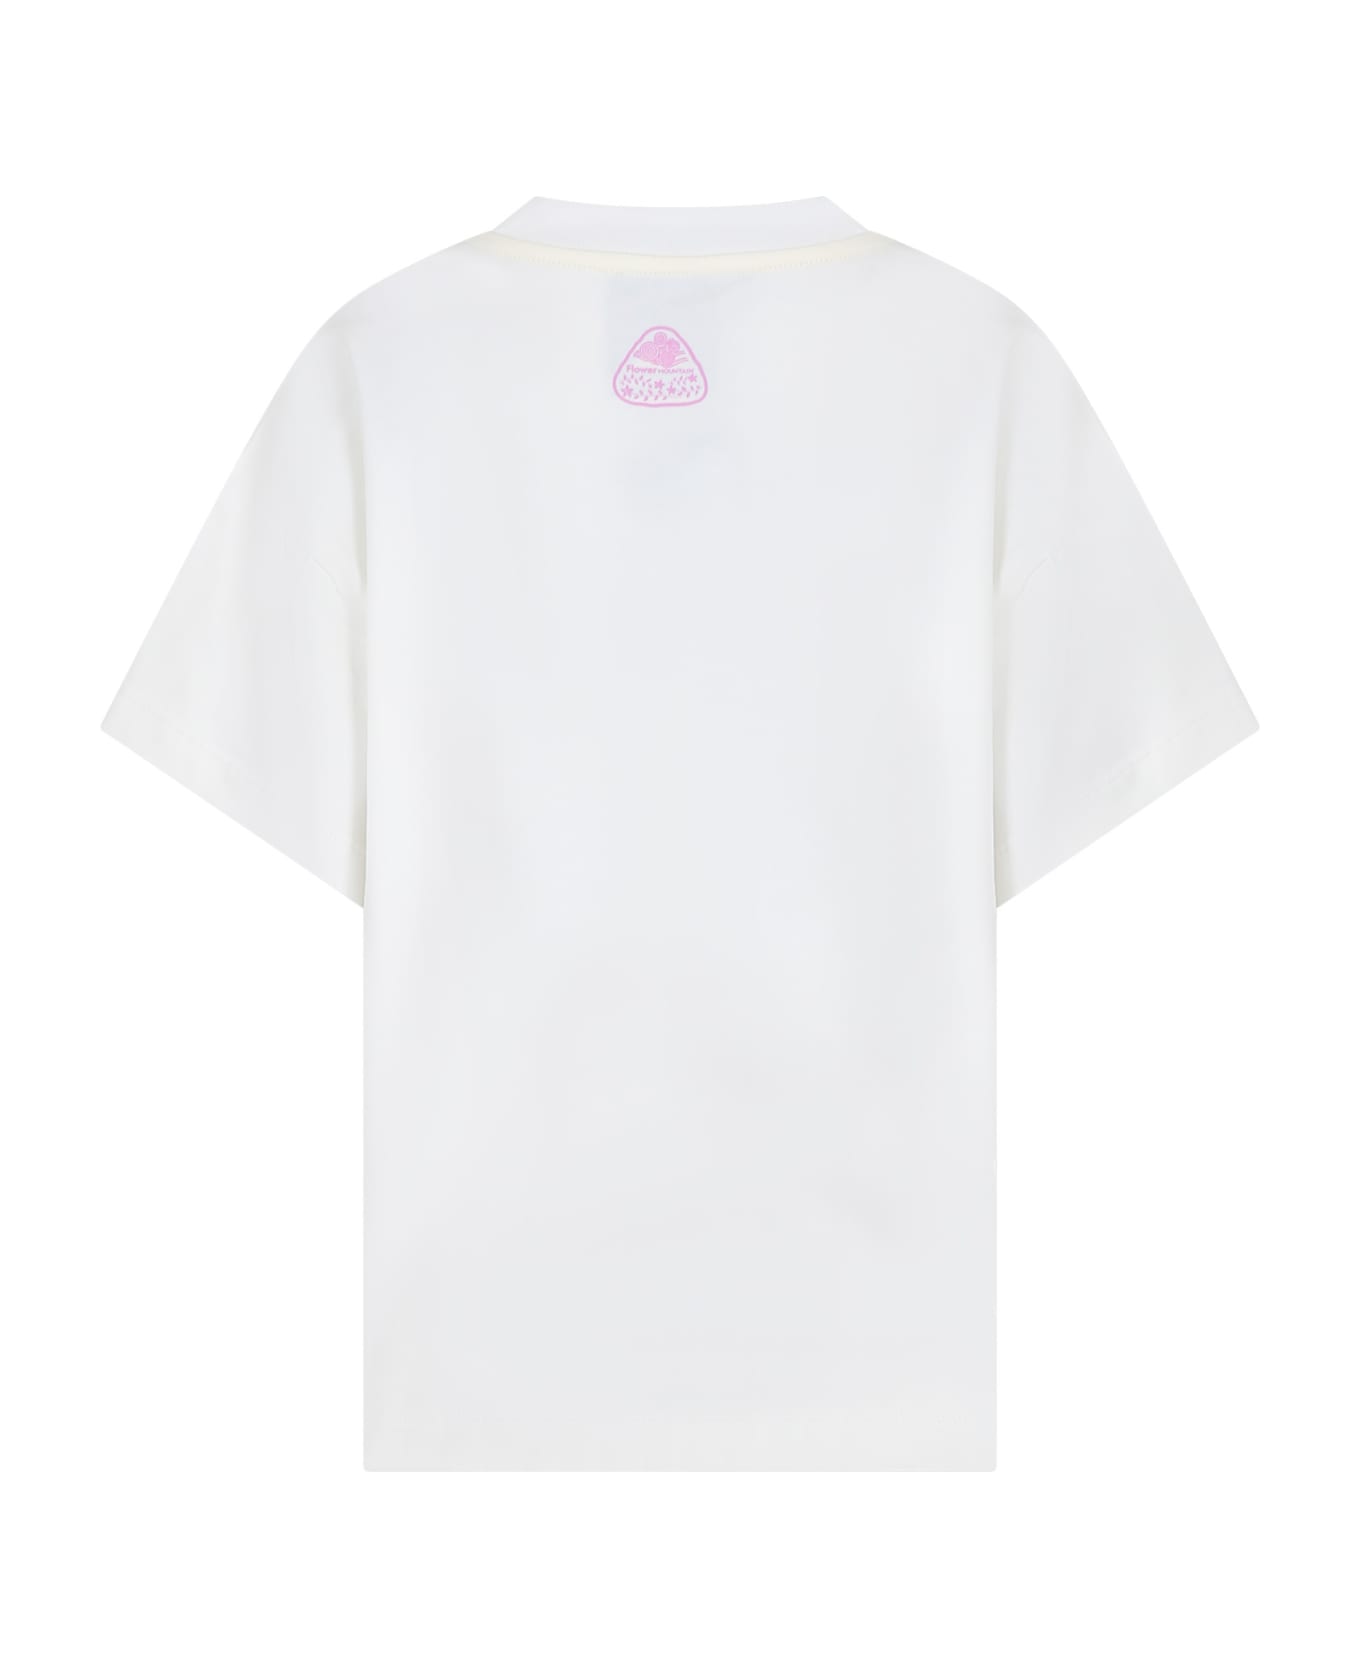 Flower Mountain White T-shirt For Girl With Flowers - White